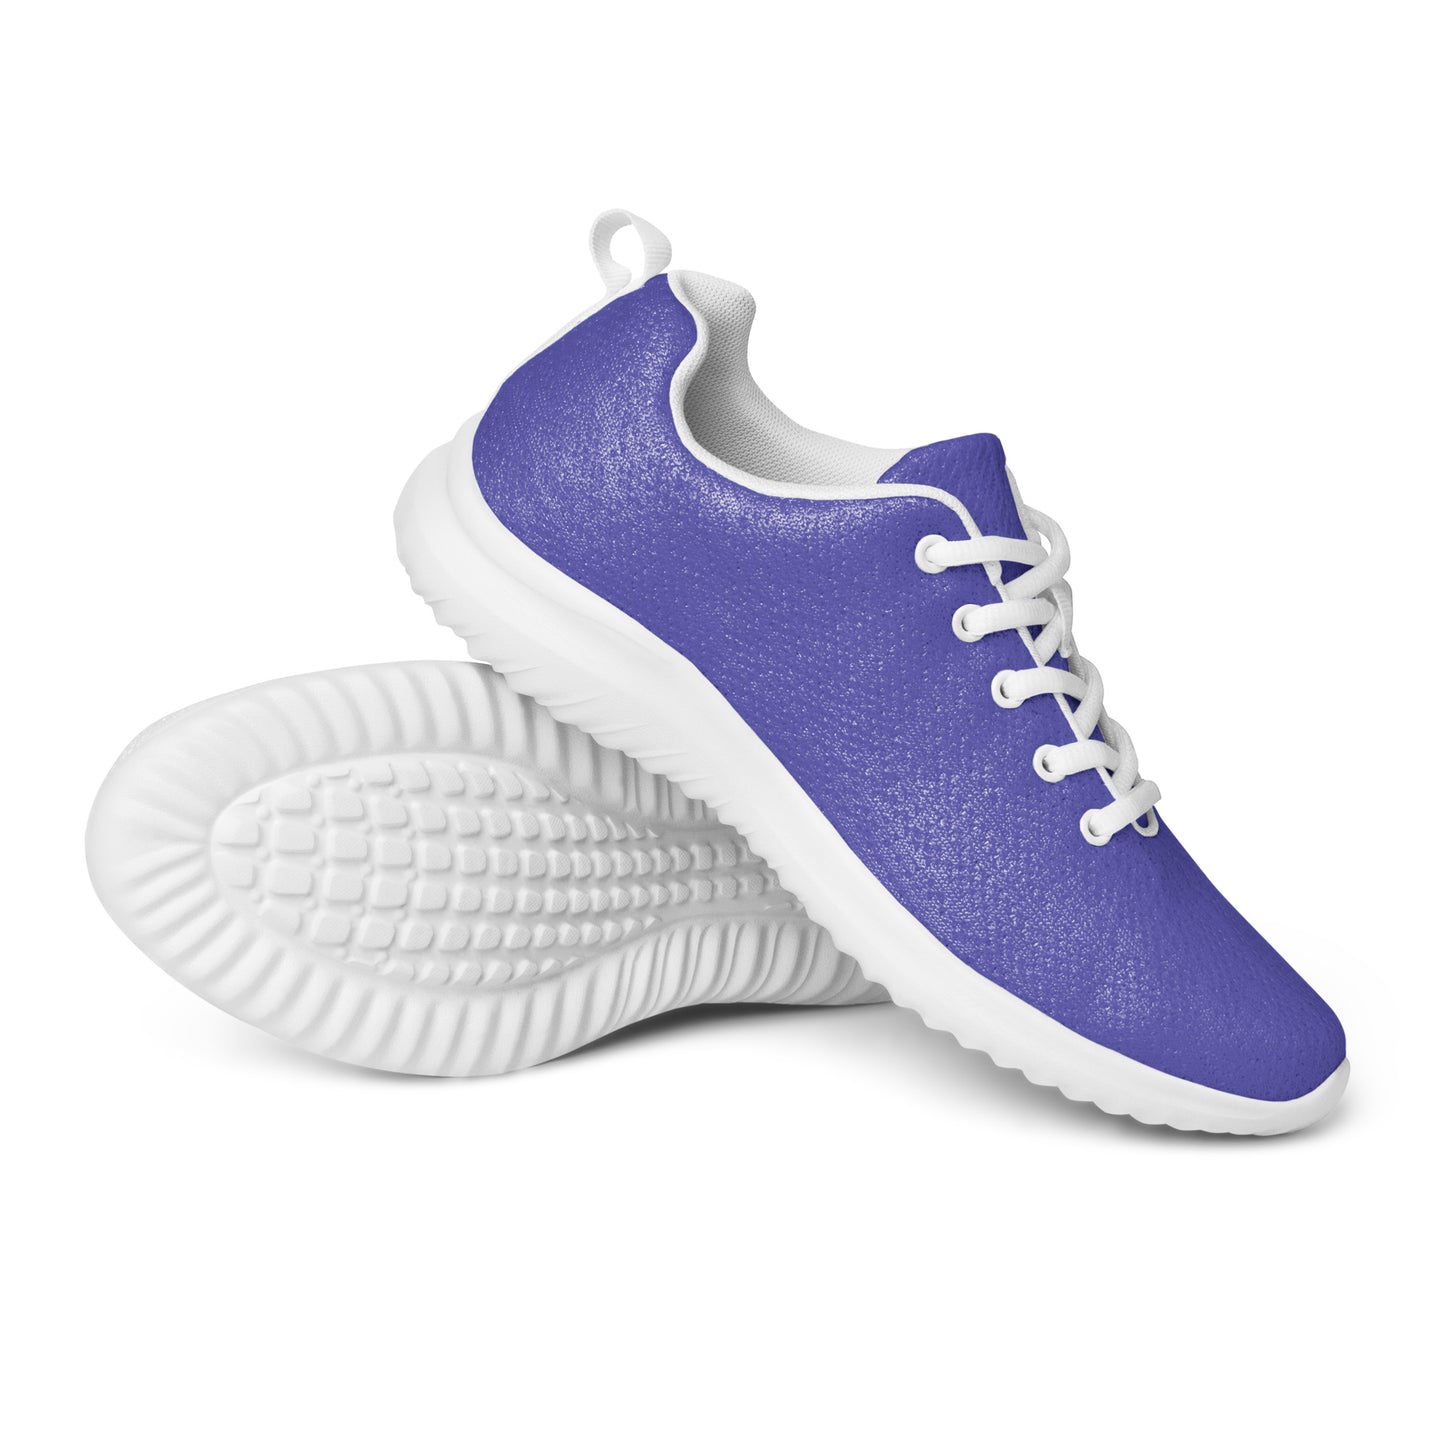 DASH Grape Candy Women’s Athletic Shoes Lightweight Breathable Design by IOBI Original Apparel